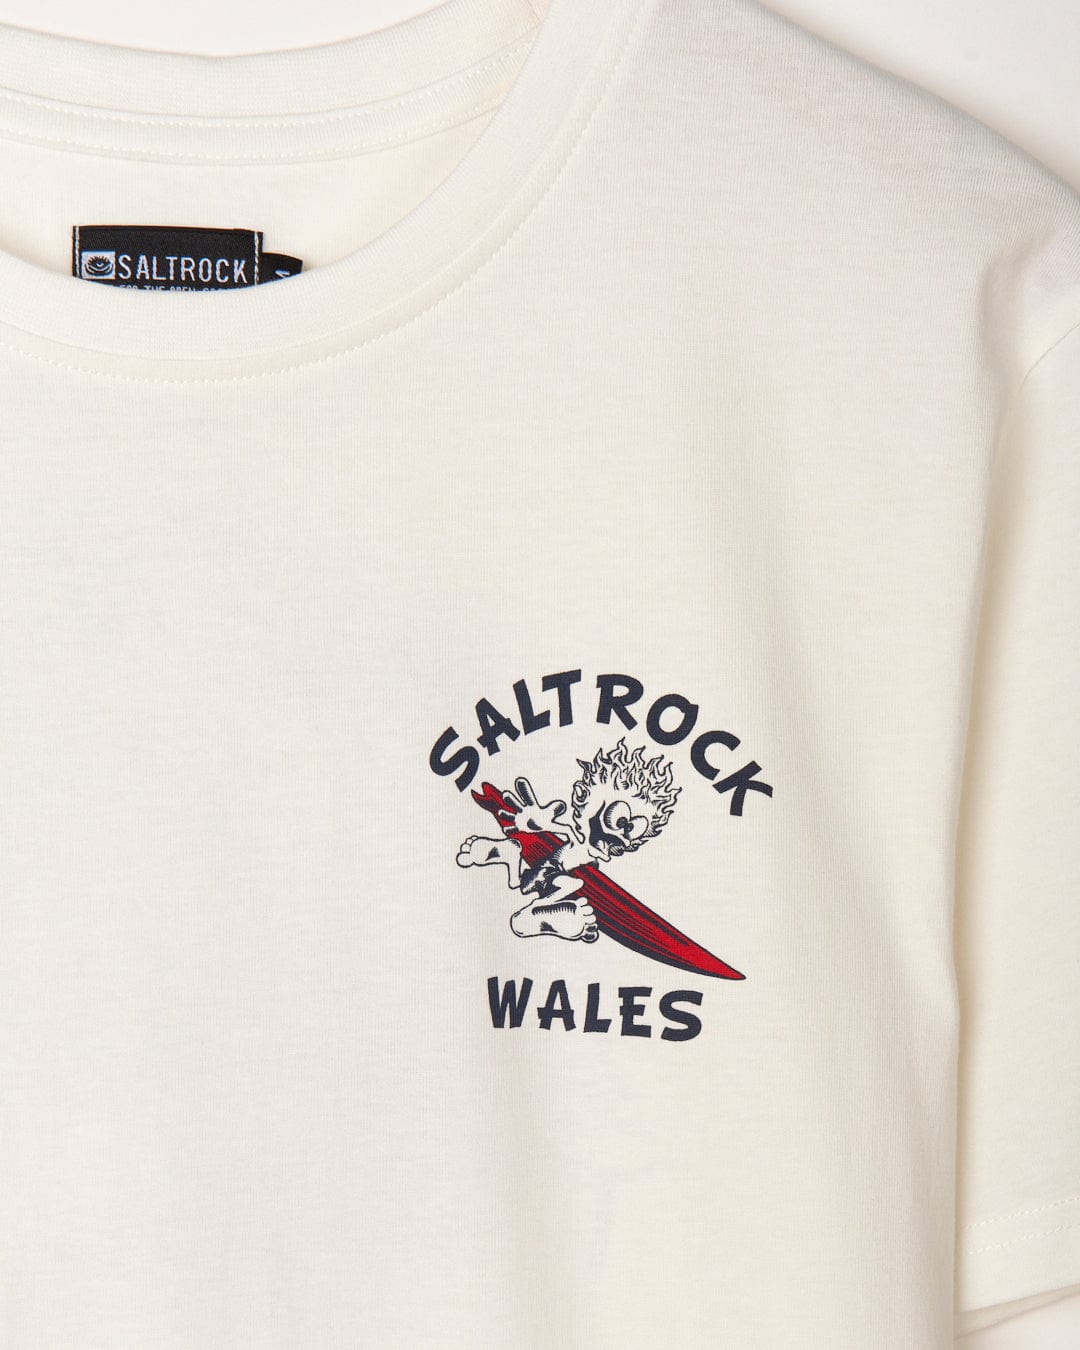 A white graphic t-shirt featuring the branding "Wave Rider Wales" by Saltrock.